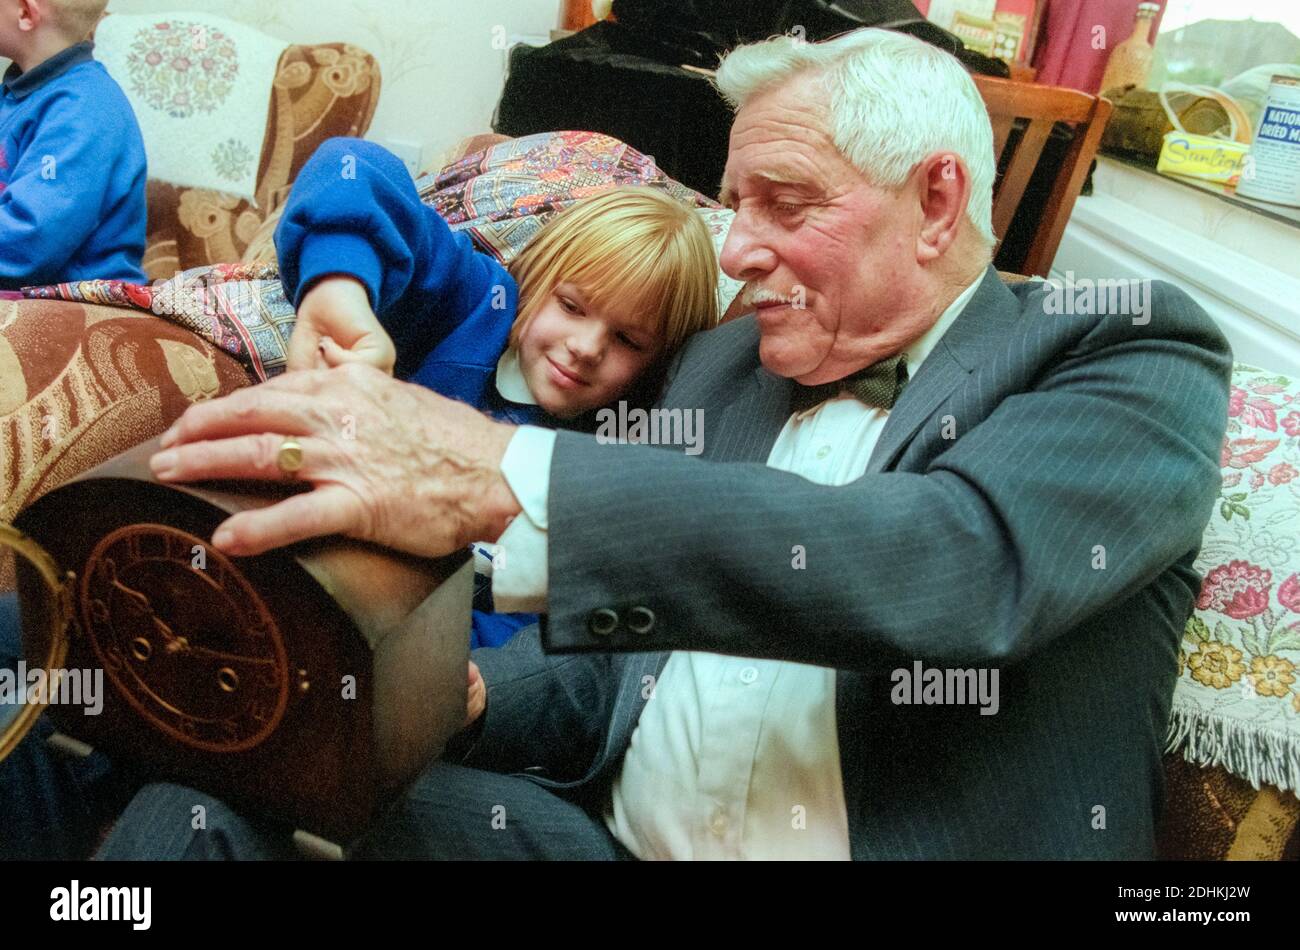 School visit to care home to visit elderly residents and look at memorabilia. UK Stock Photo